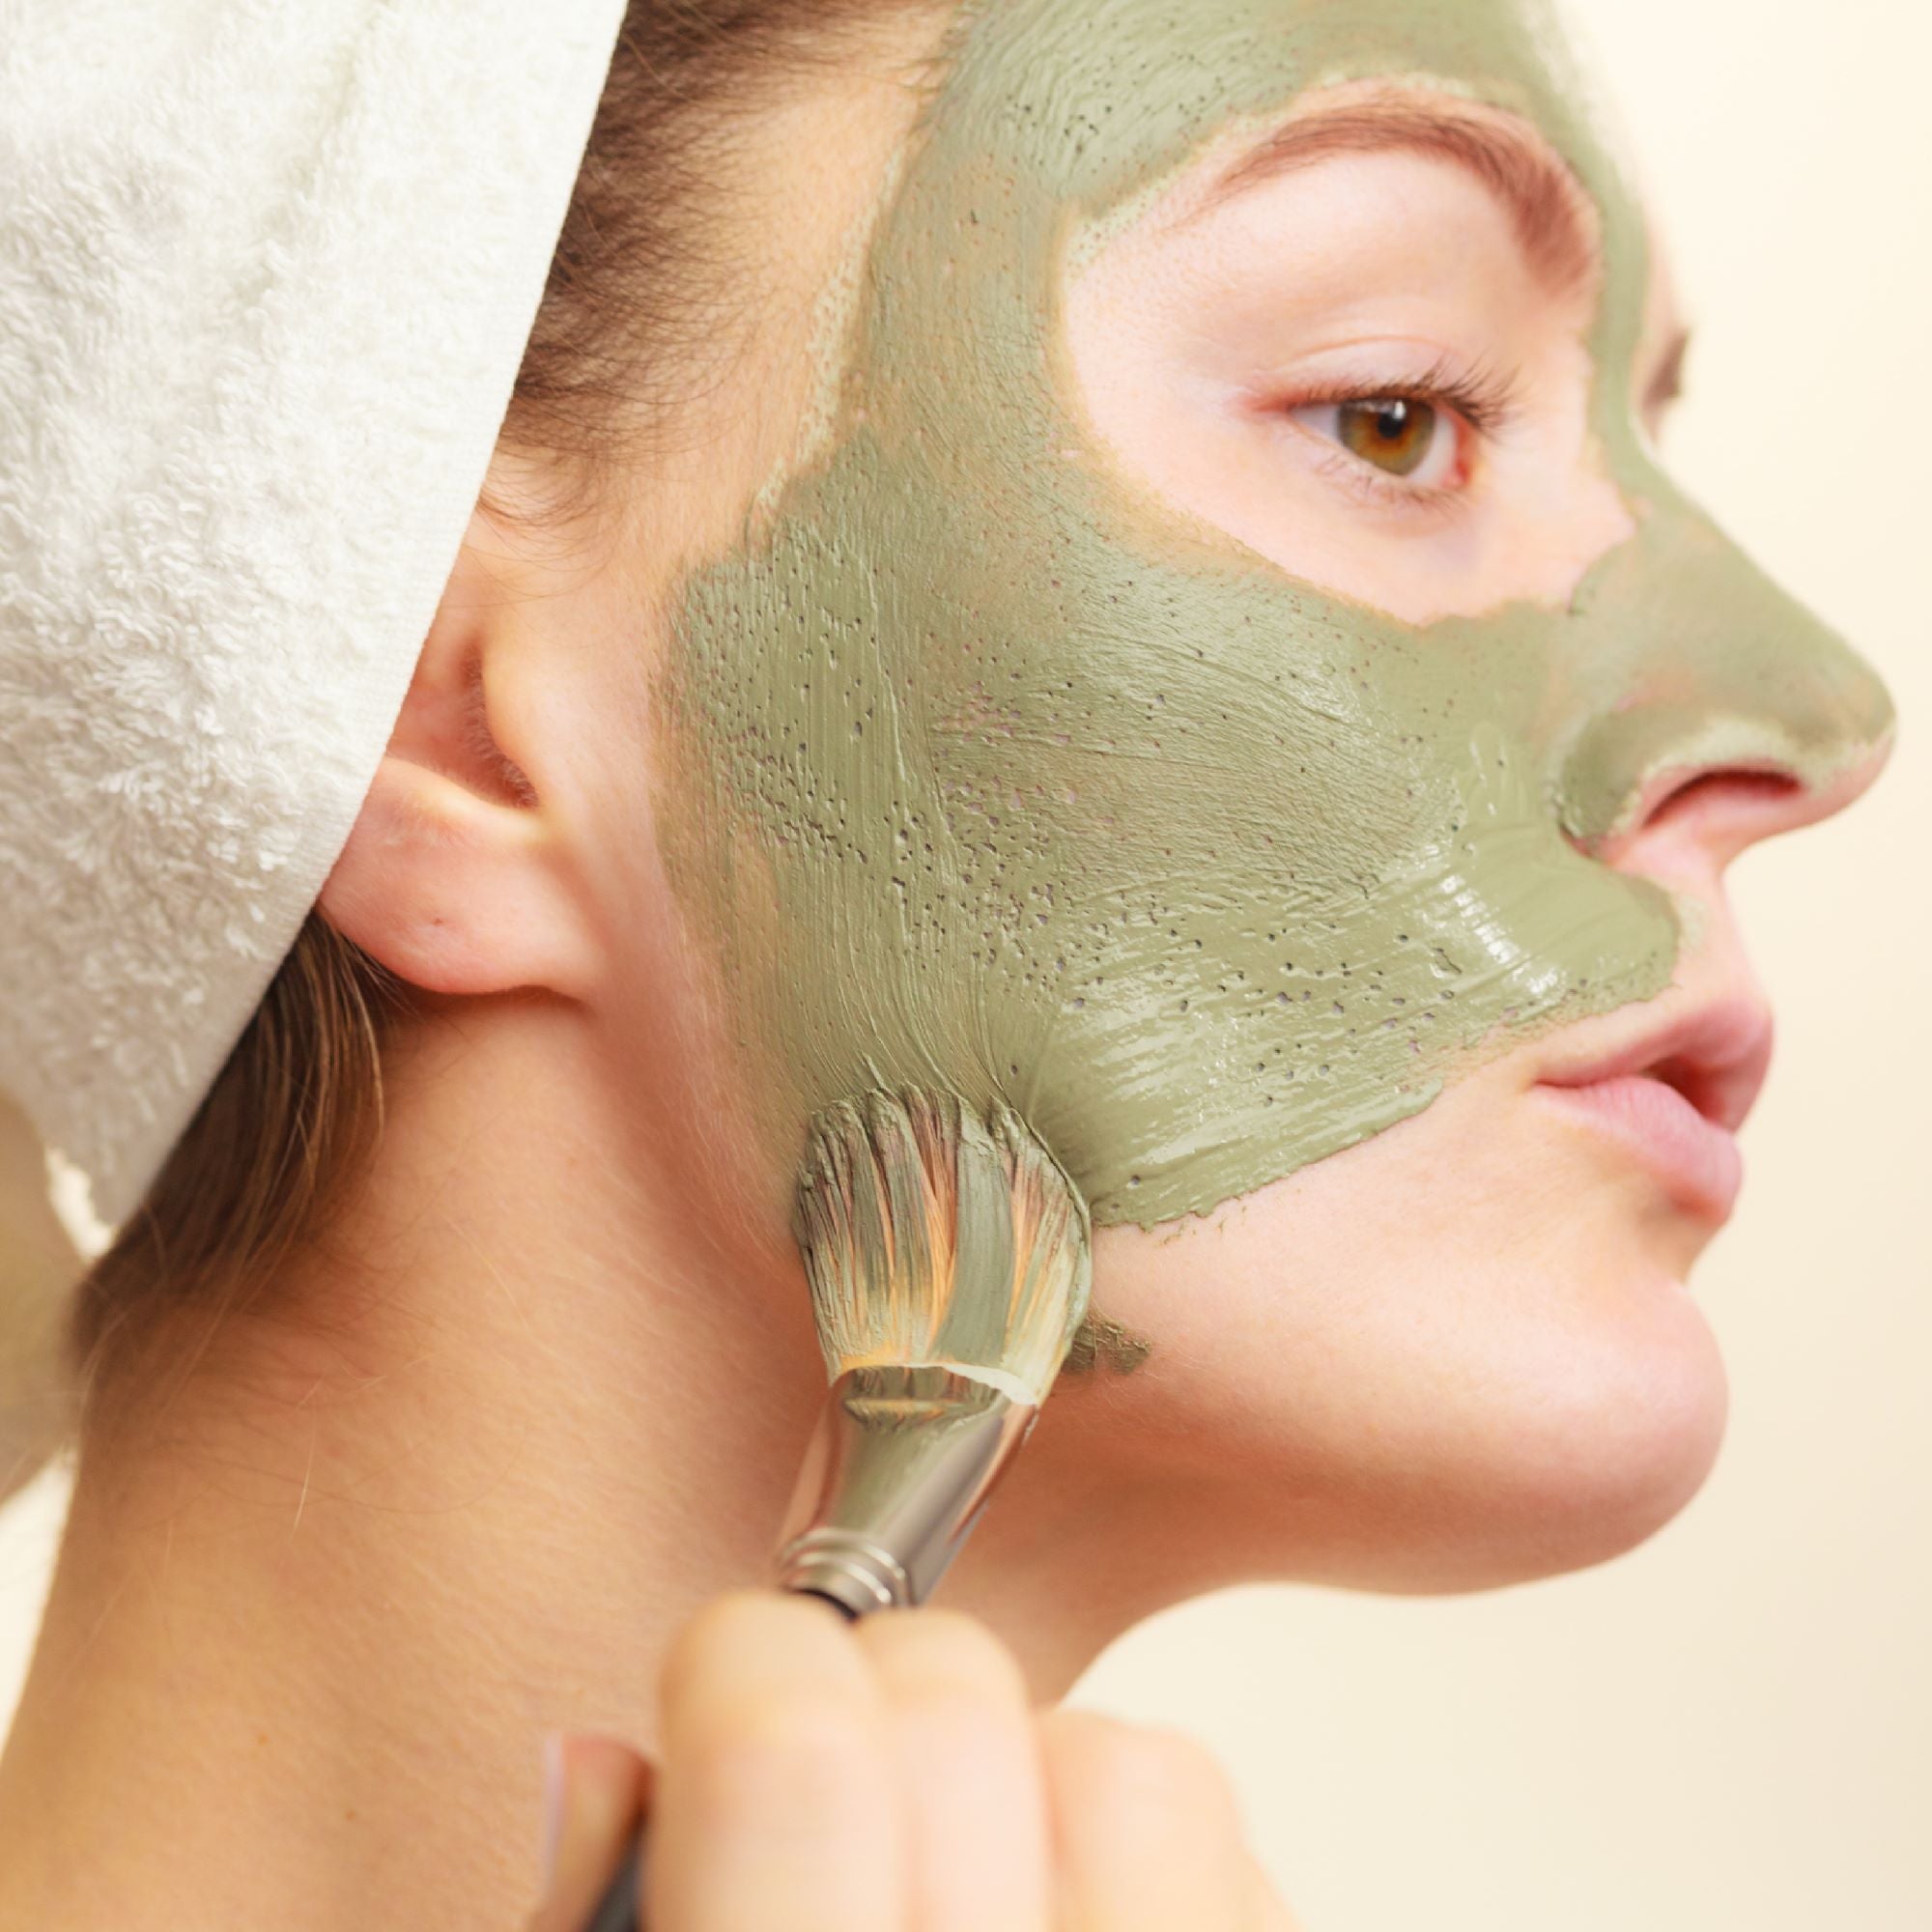 BENTONITE CLAY MASK BENEFITS WHEN USED IN SKIN CARE